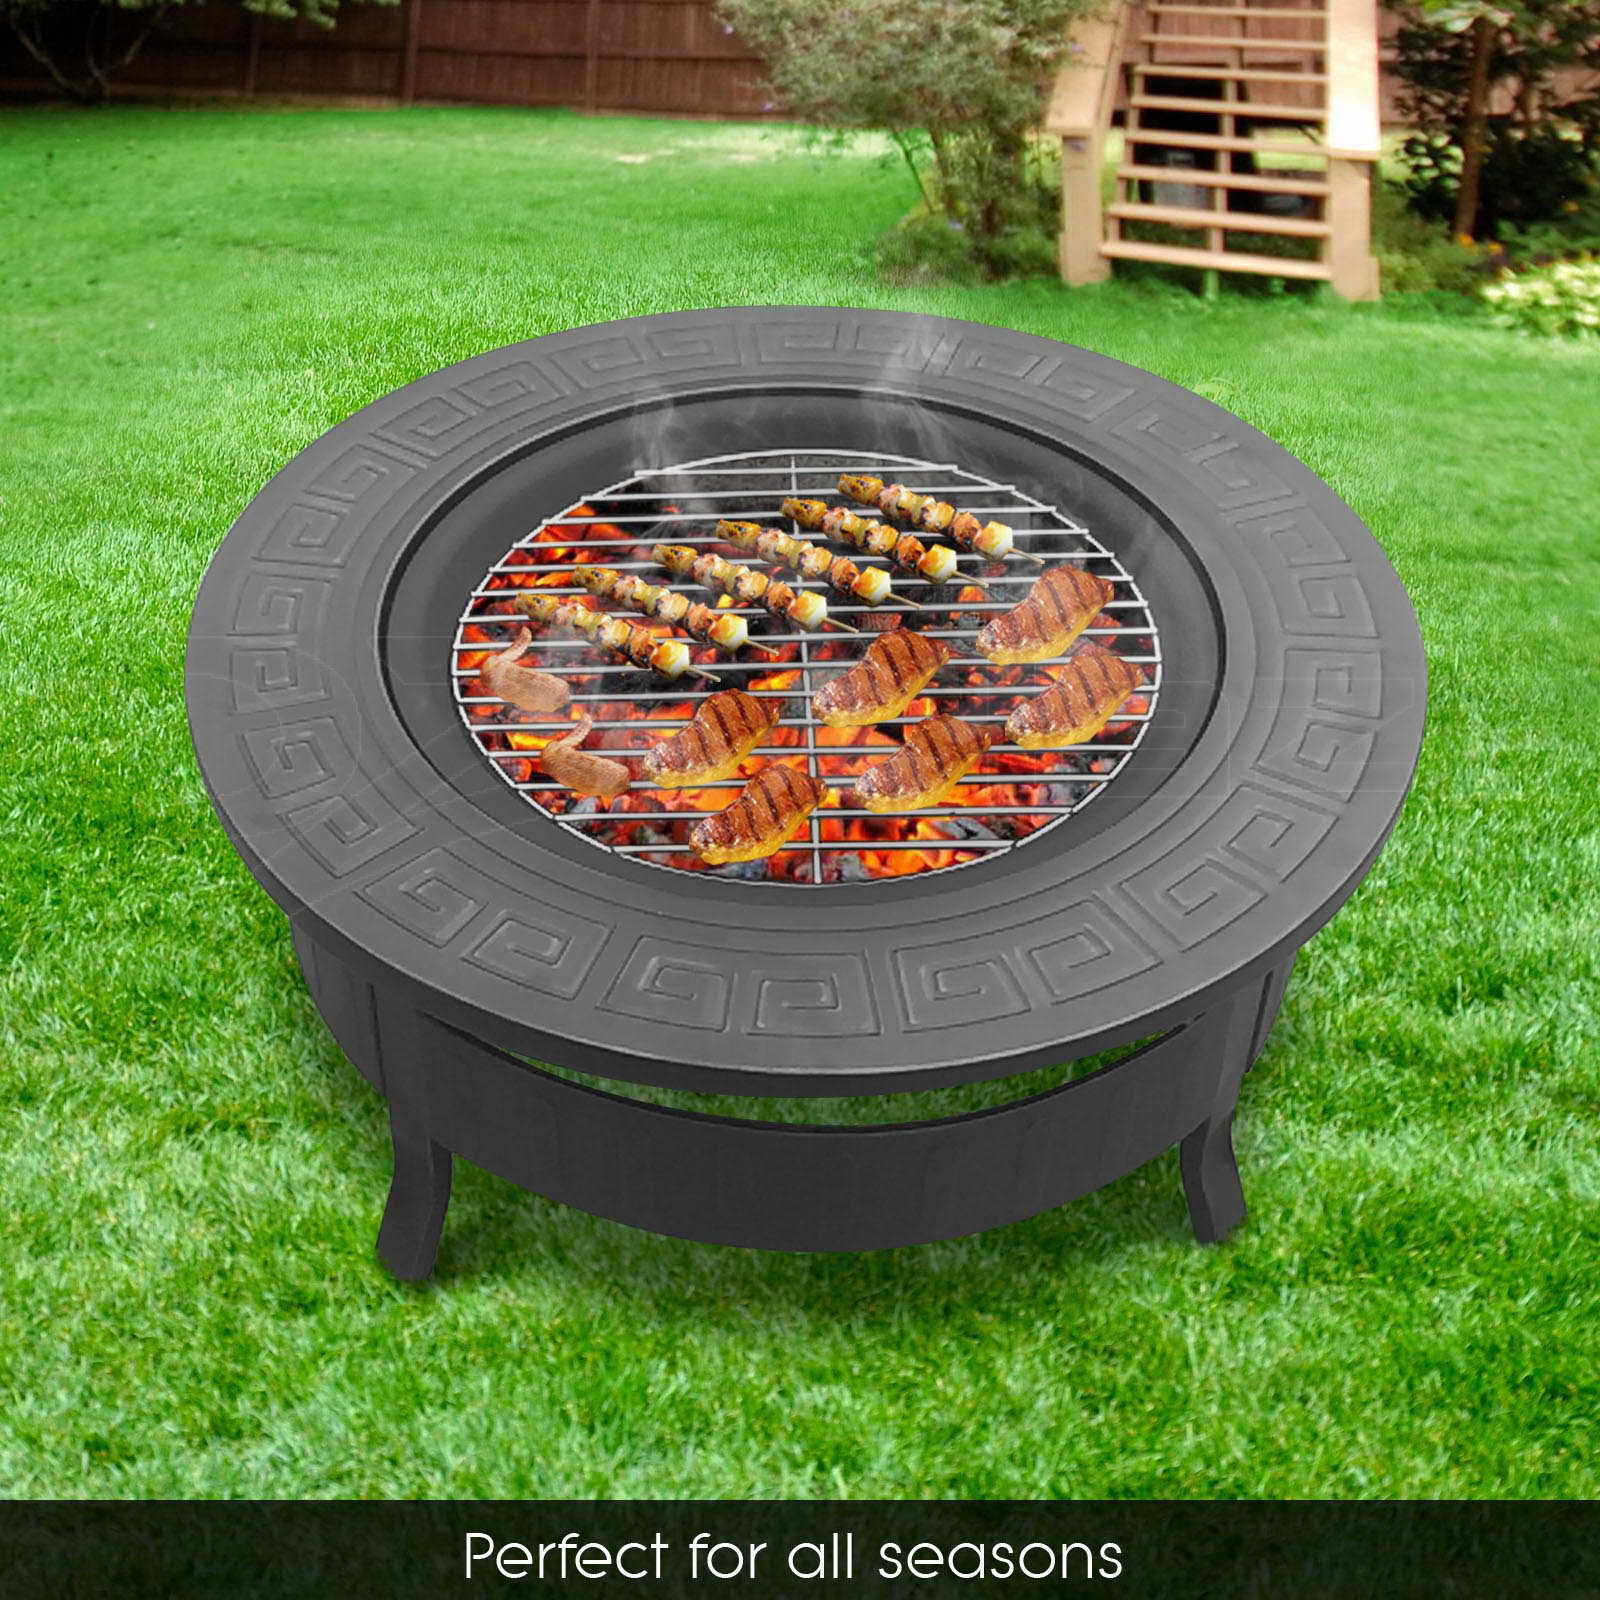 Outdoor Fire Pit BBQ Table Grill Garden Patio Camping ...